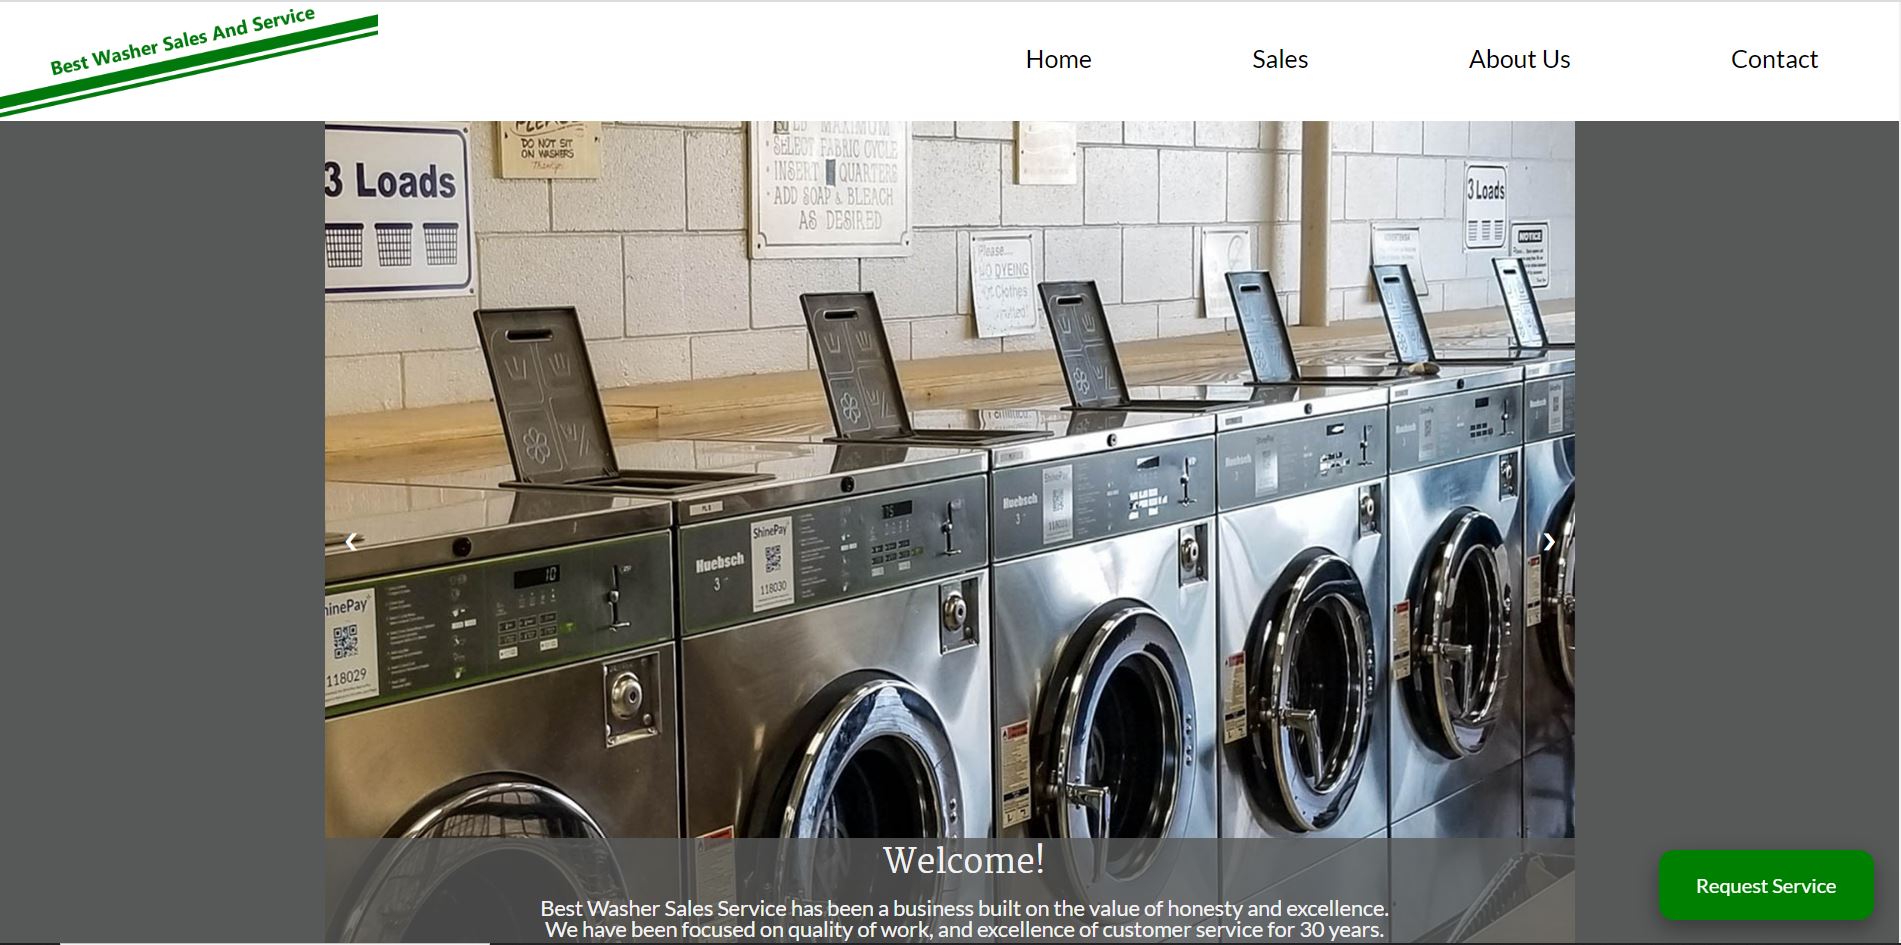 Best Washer Sales and Service Website